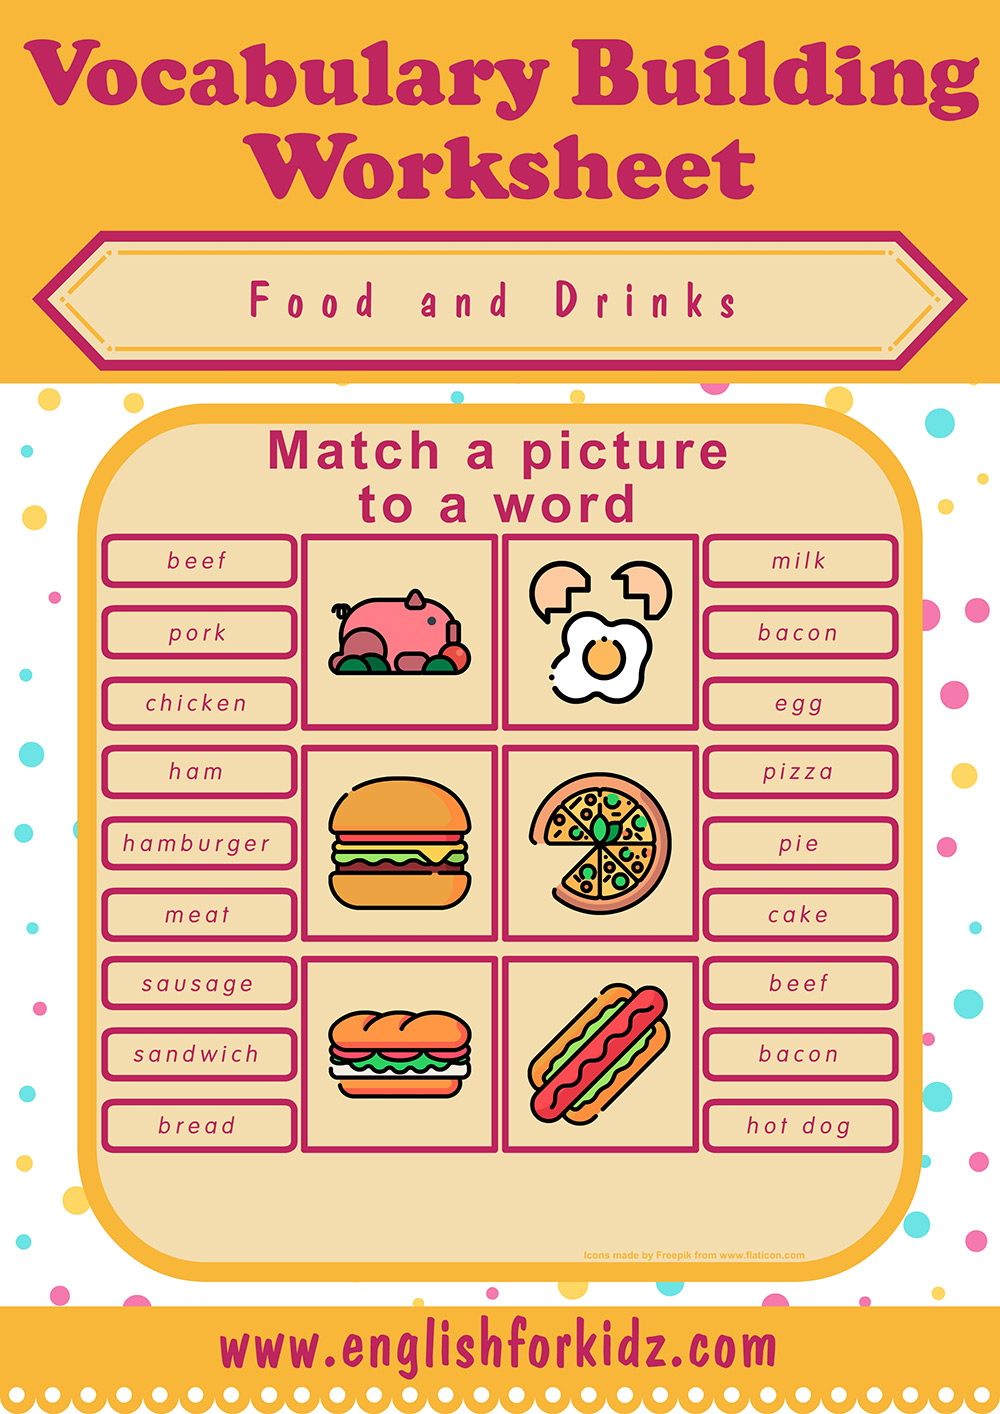 english-for-kids-step-by-step-food-drinks-worksheets-picture-to-word-matching